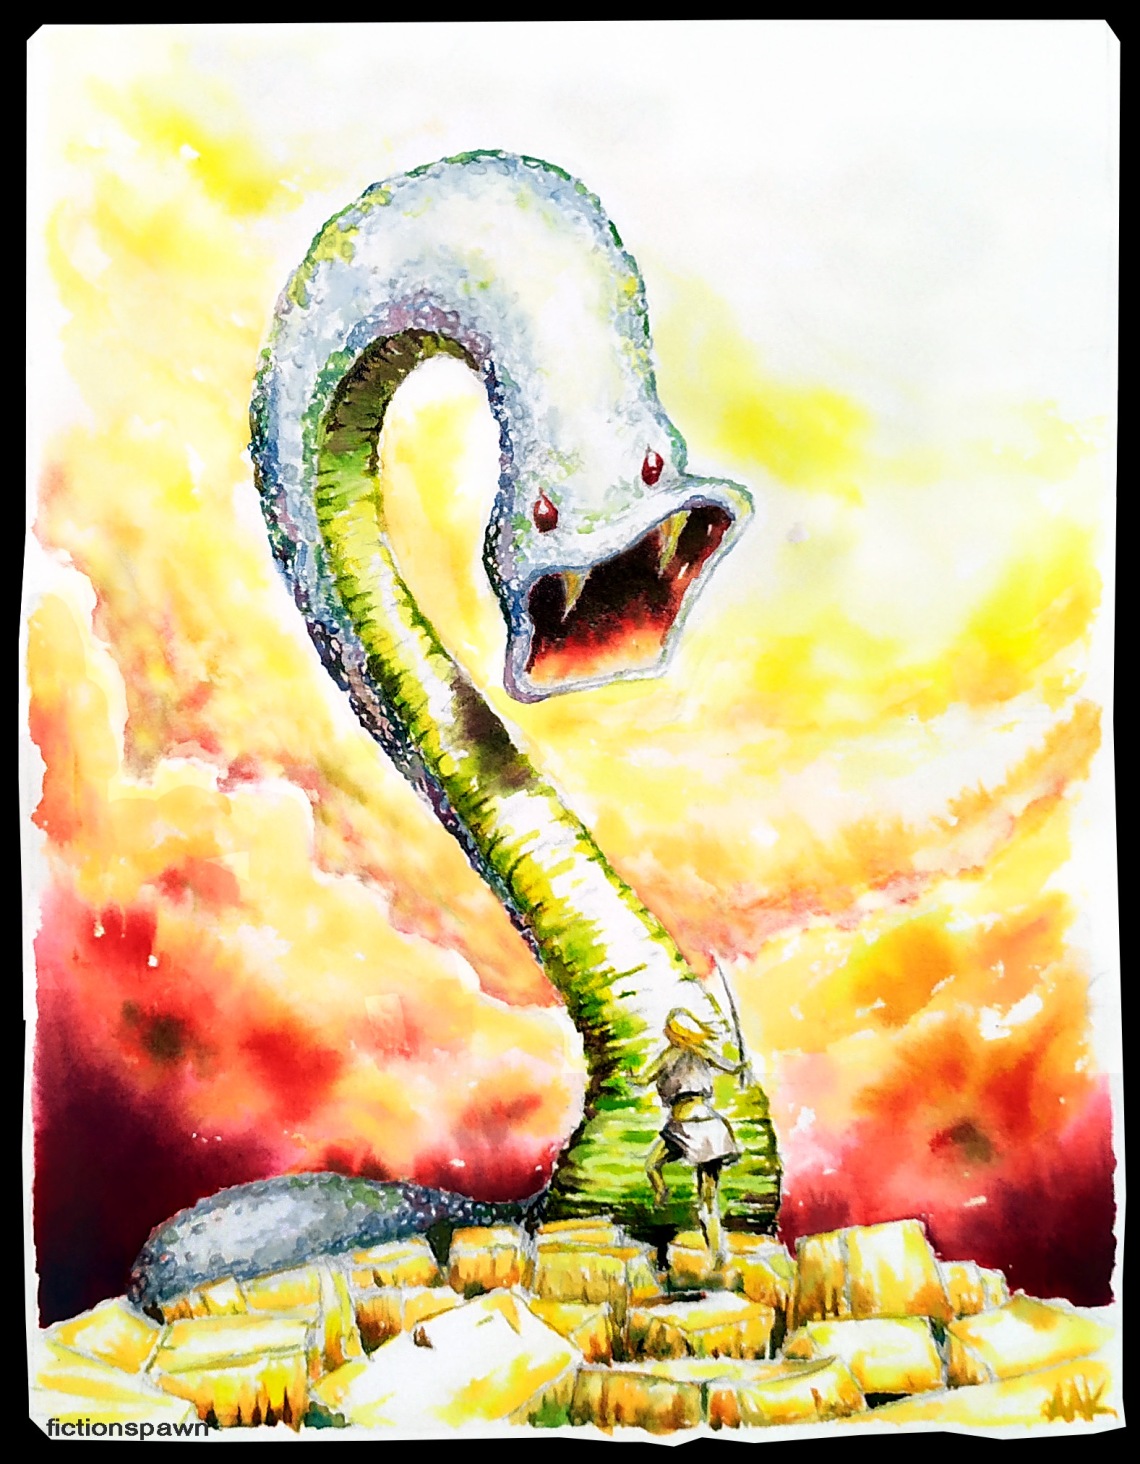 Snake worm monster Aak fictionspawn